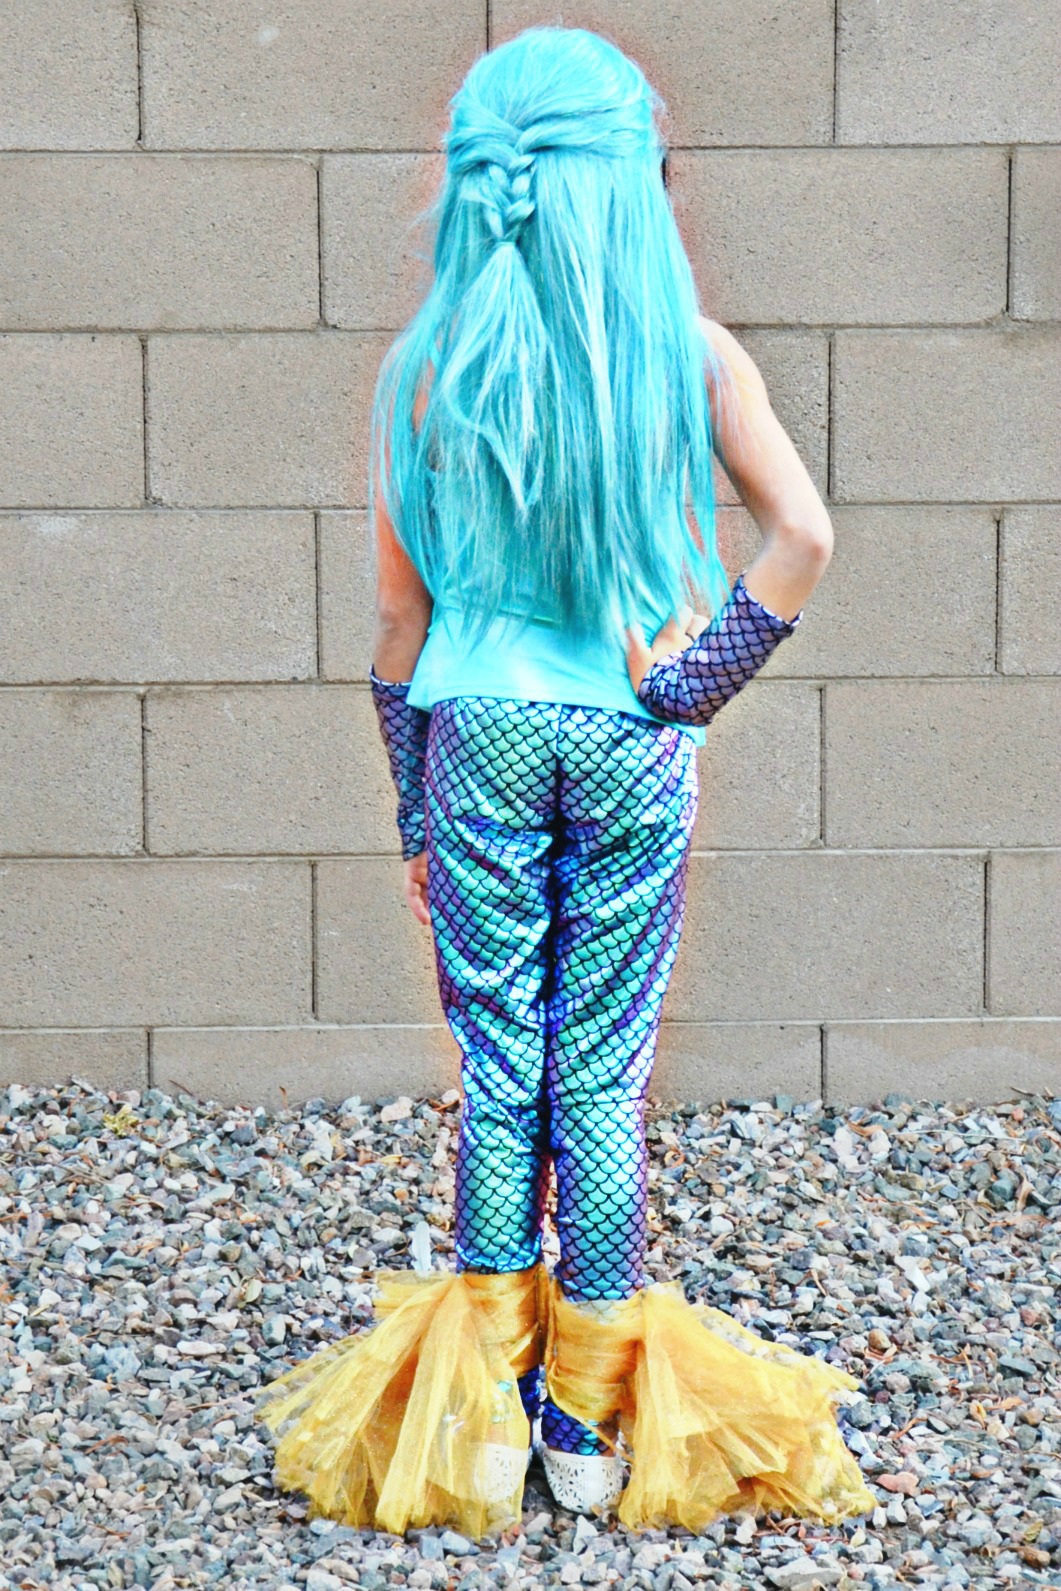 Learn how to add a mermaid fin tail to leggings for an easy DIY mermaid costume. Add accessories to complete the magical look.